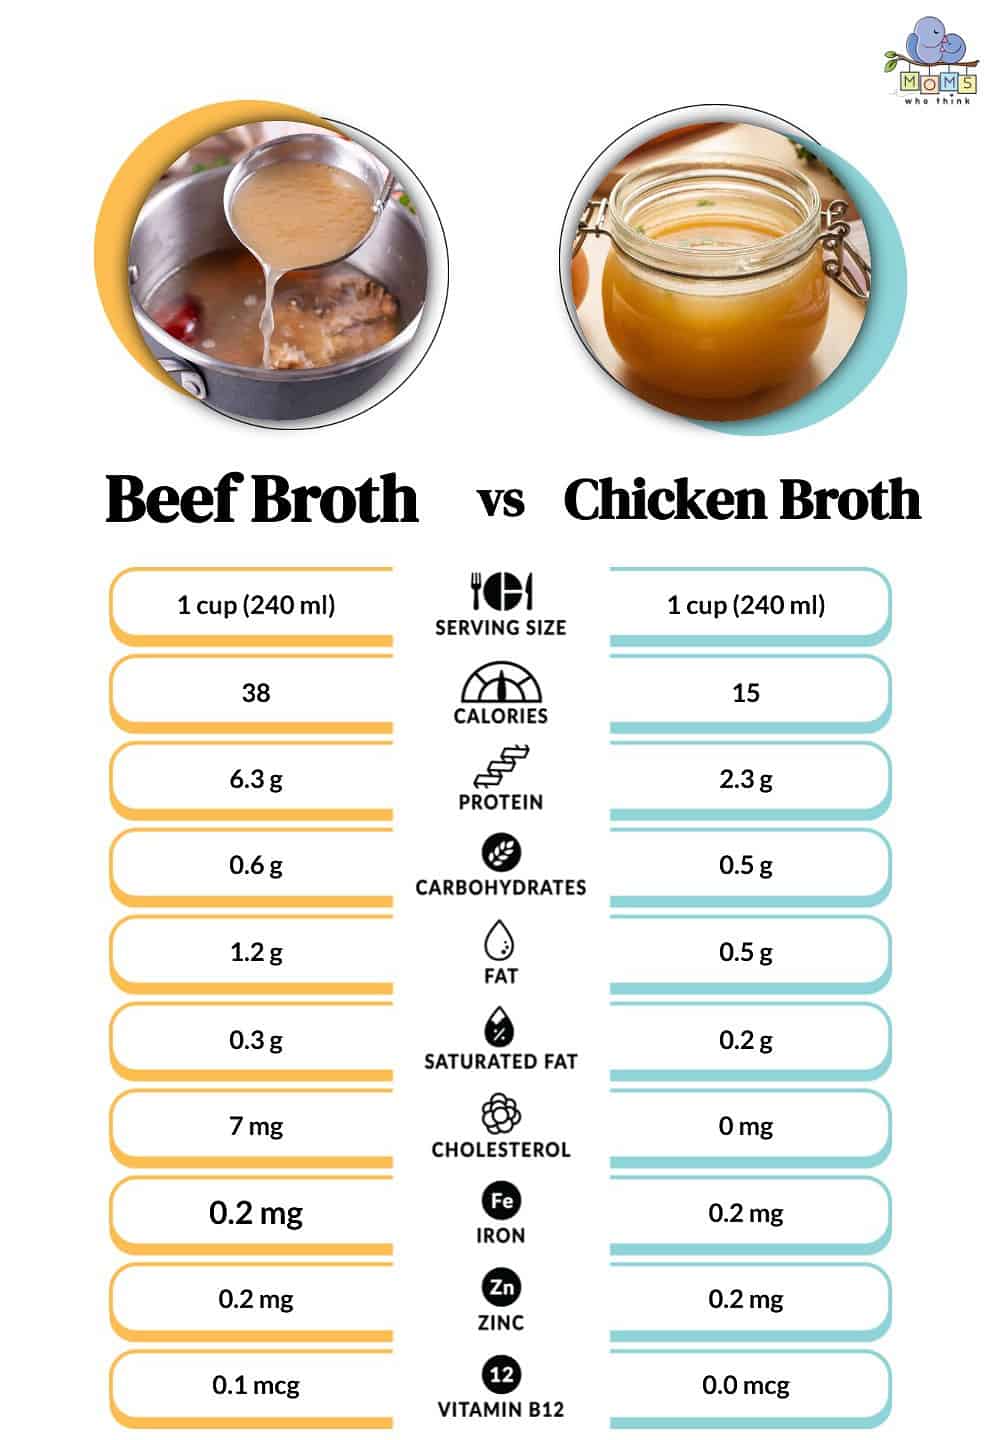 Beef Broth vs Chicken Broth Nutritional Facts